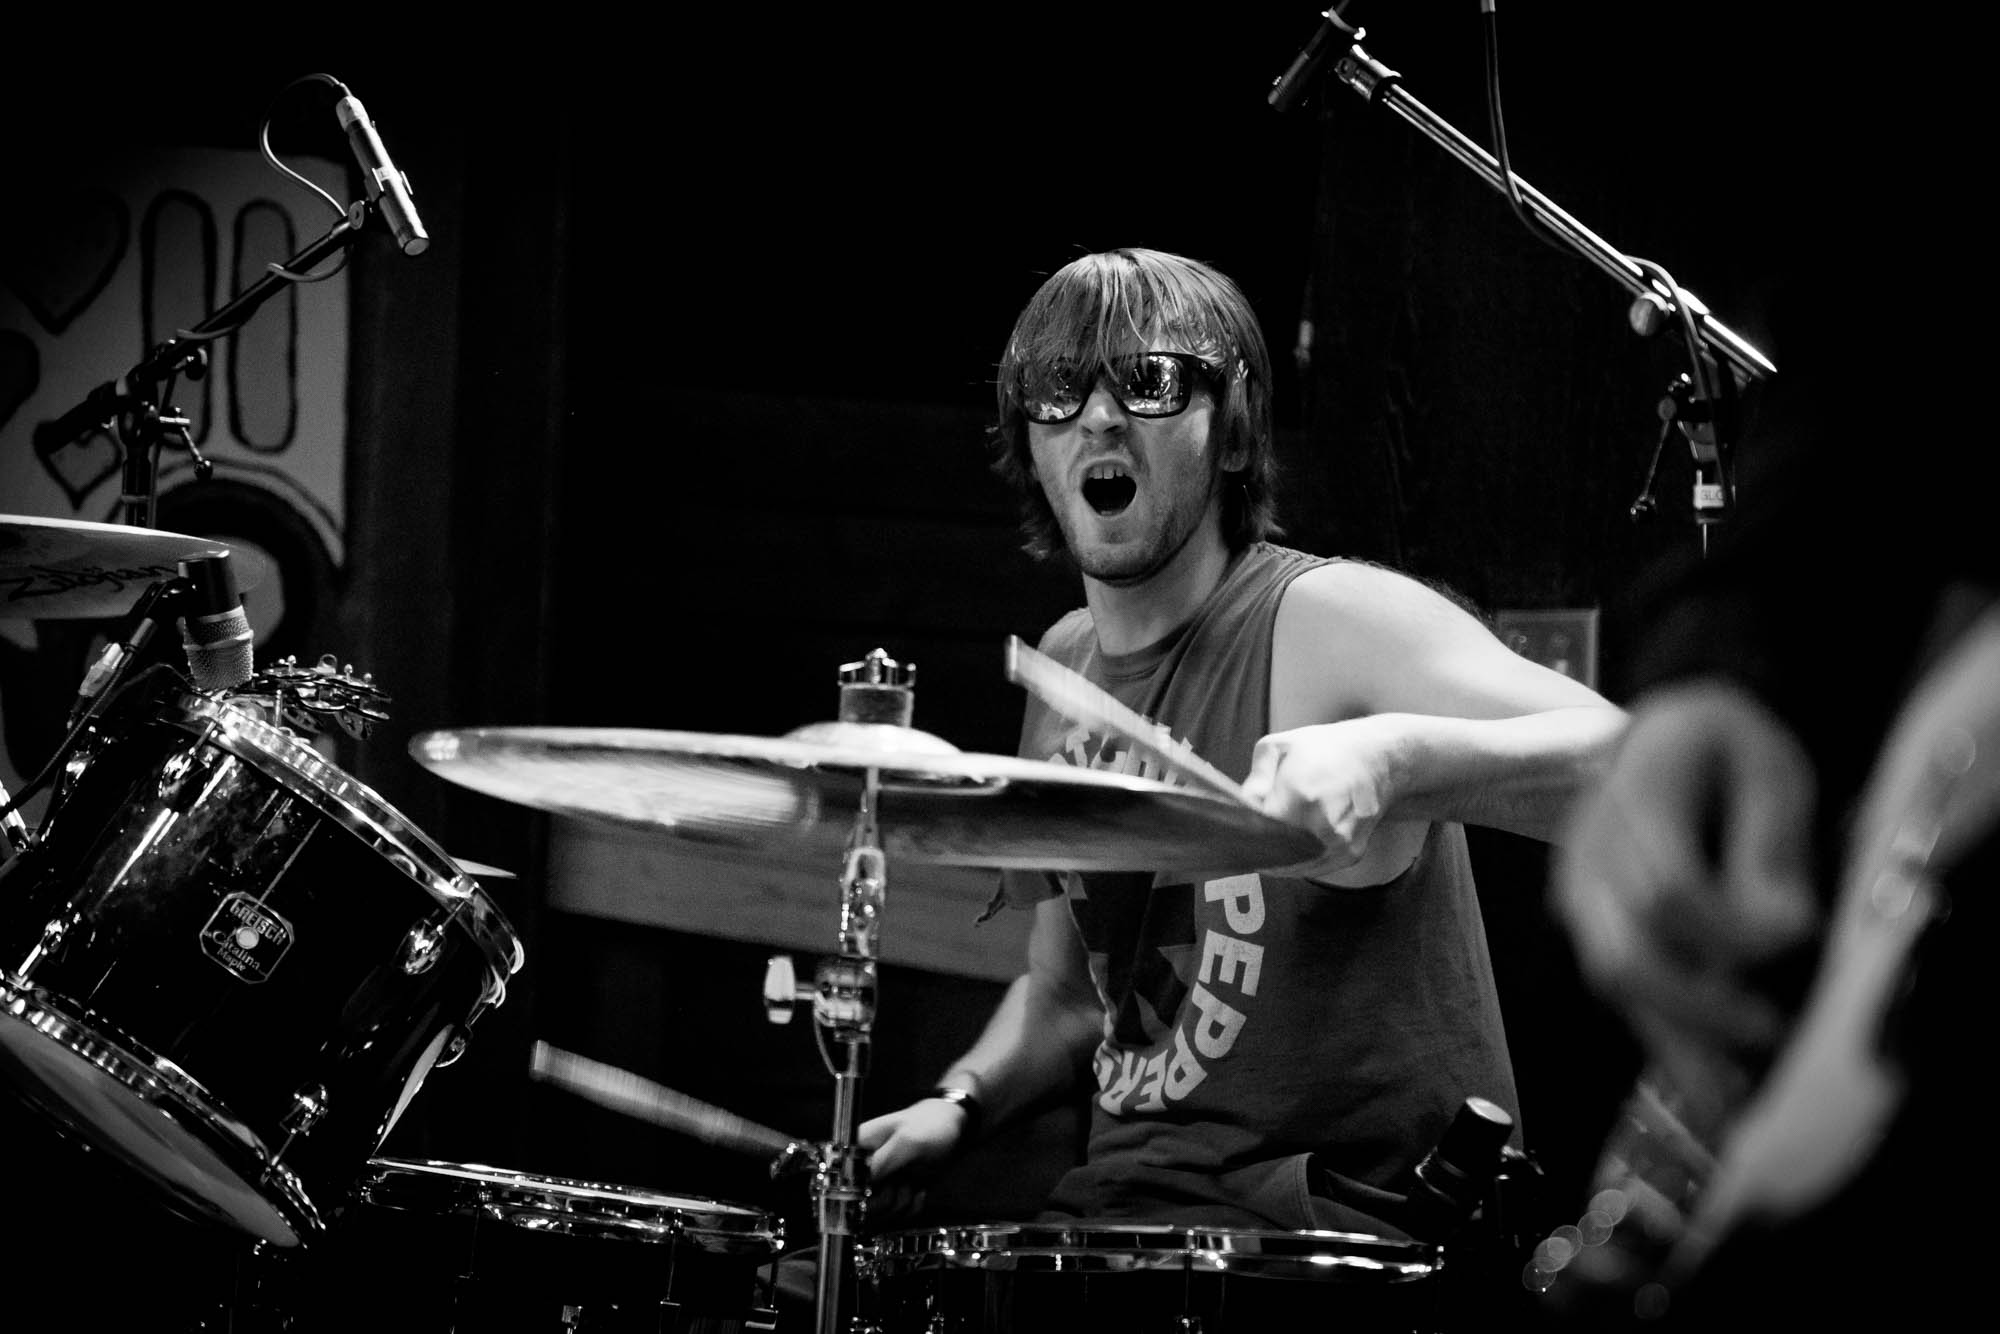 A musician playing drums on stage